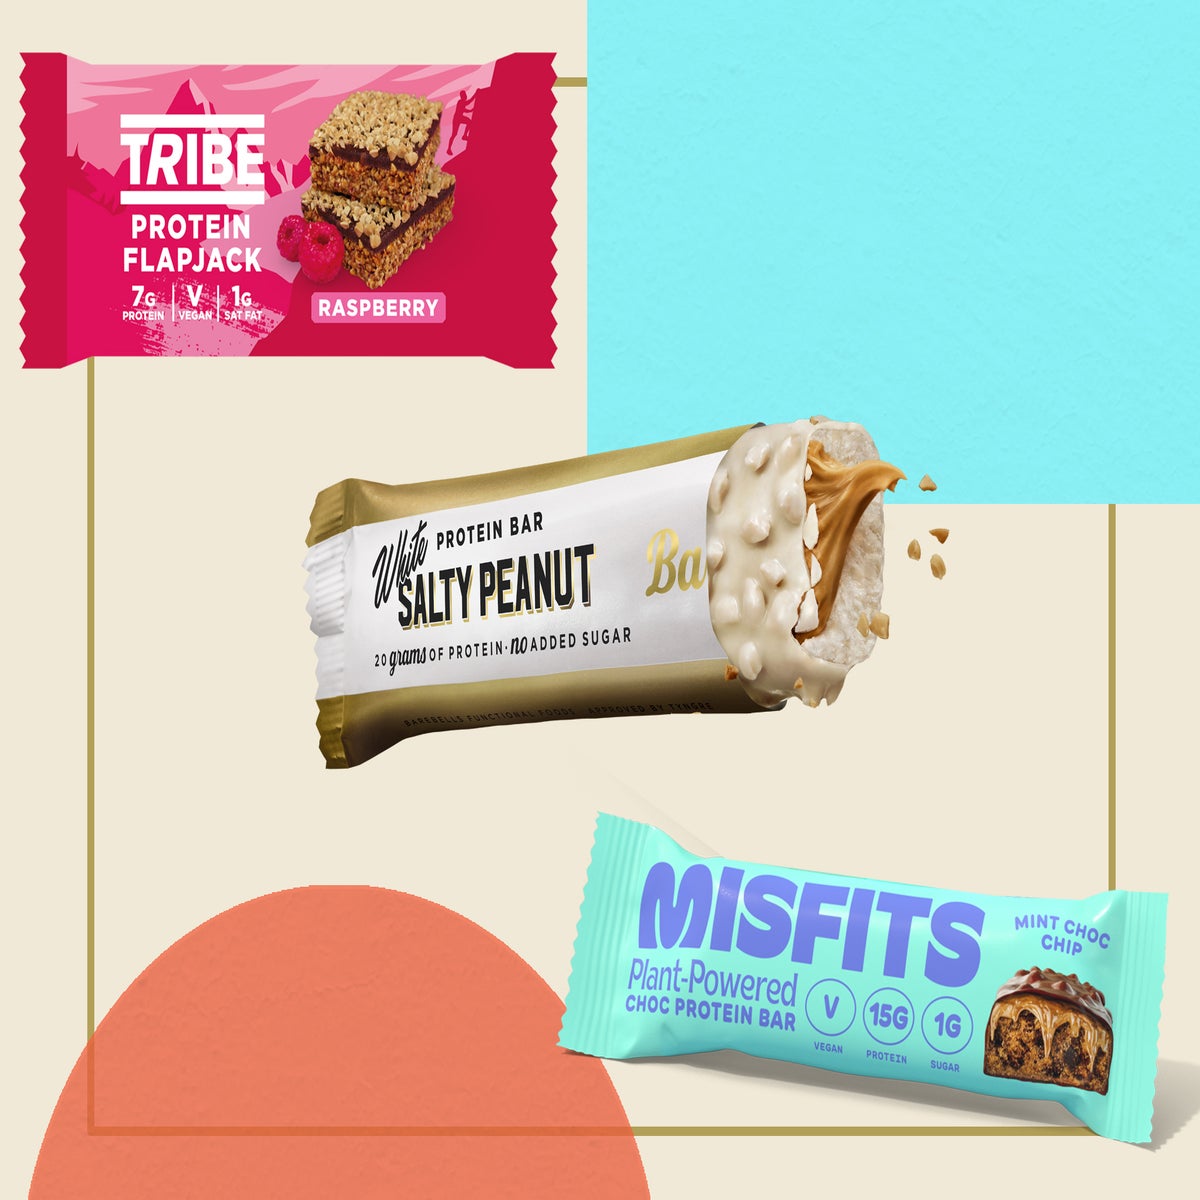 10 Best Tasting Protein Bars UK: Barebells, dairy free and more